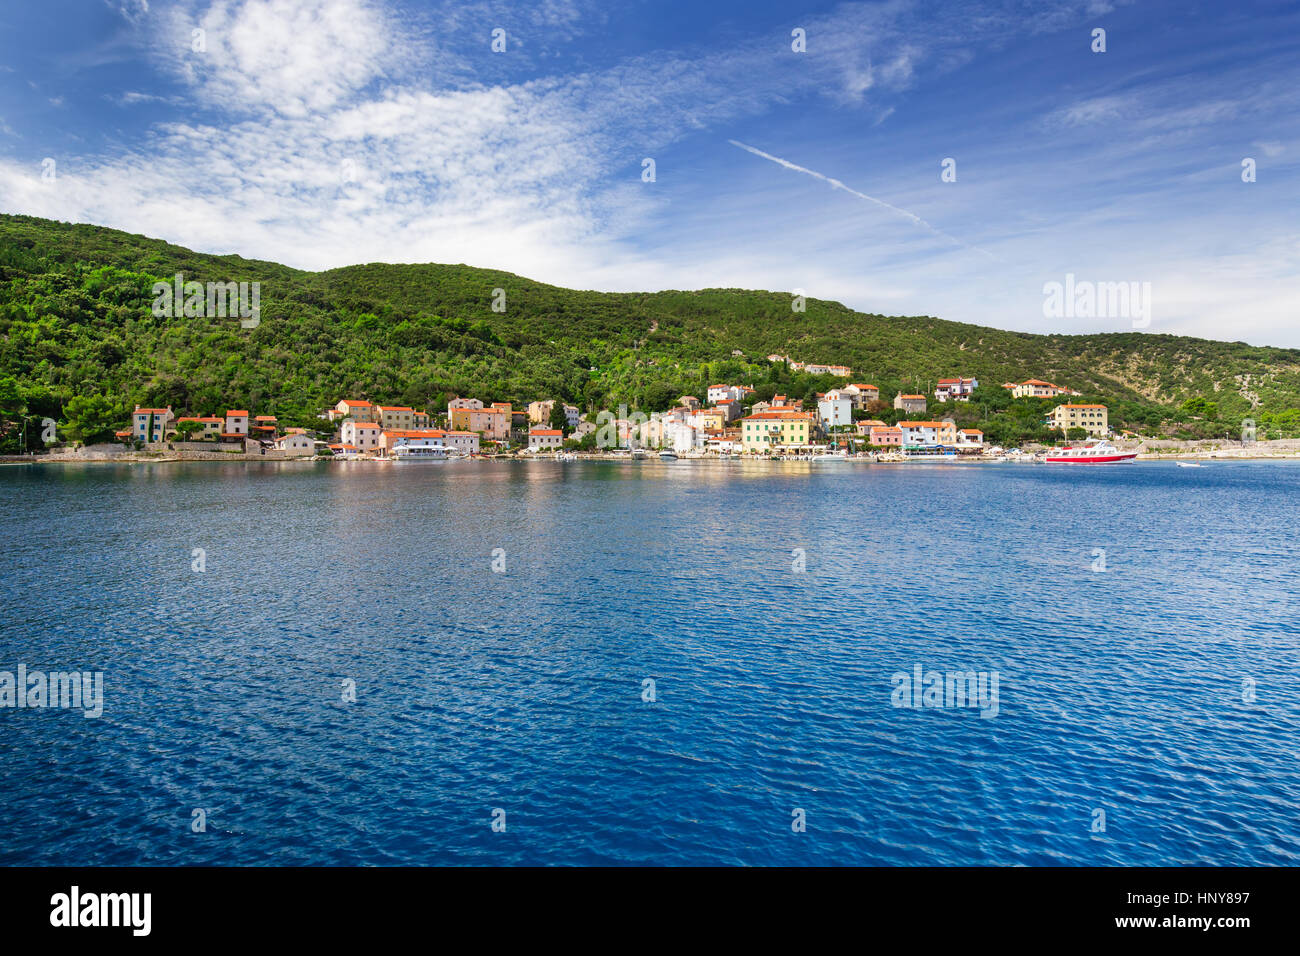 Island Cres surrounded by pine trees, Istria, Croatia Stock Photo